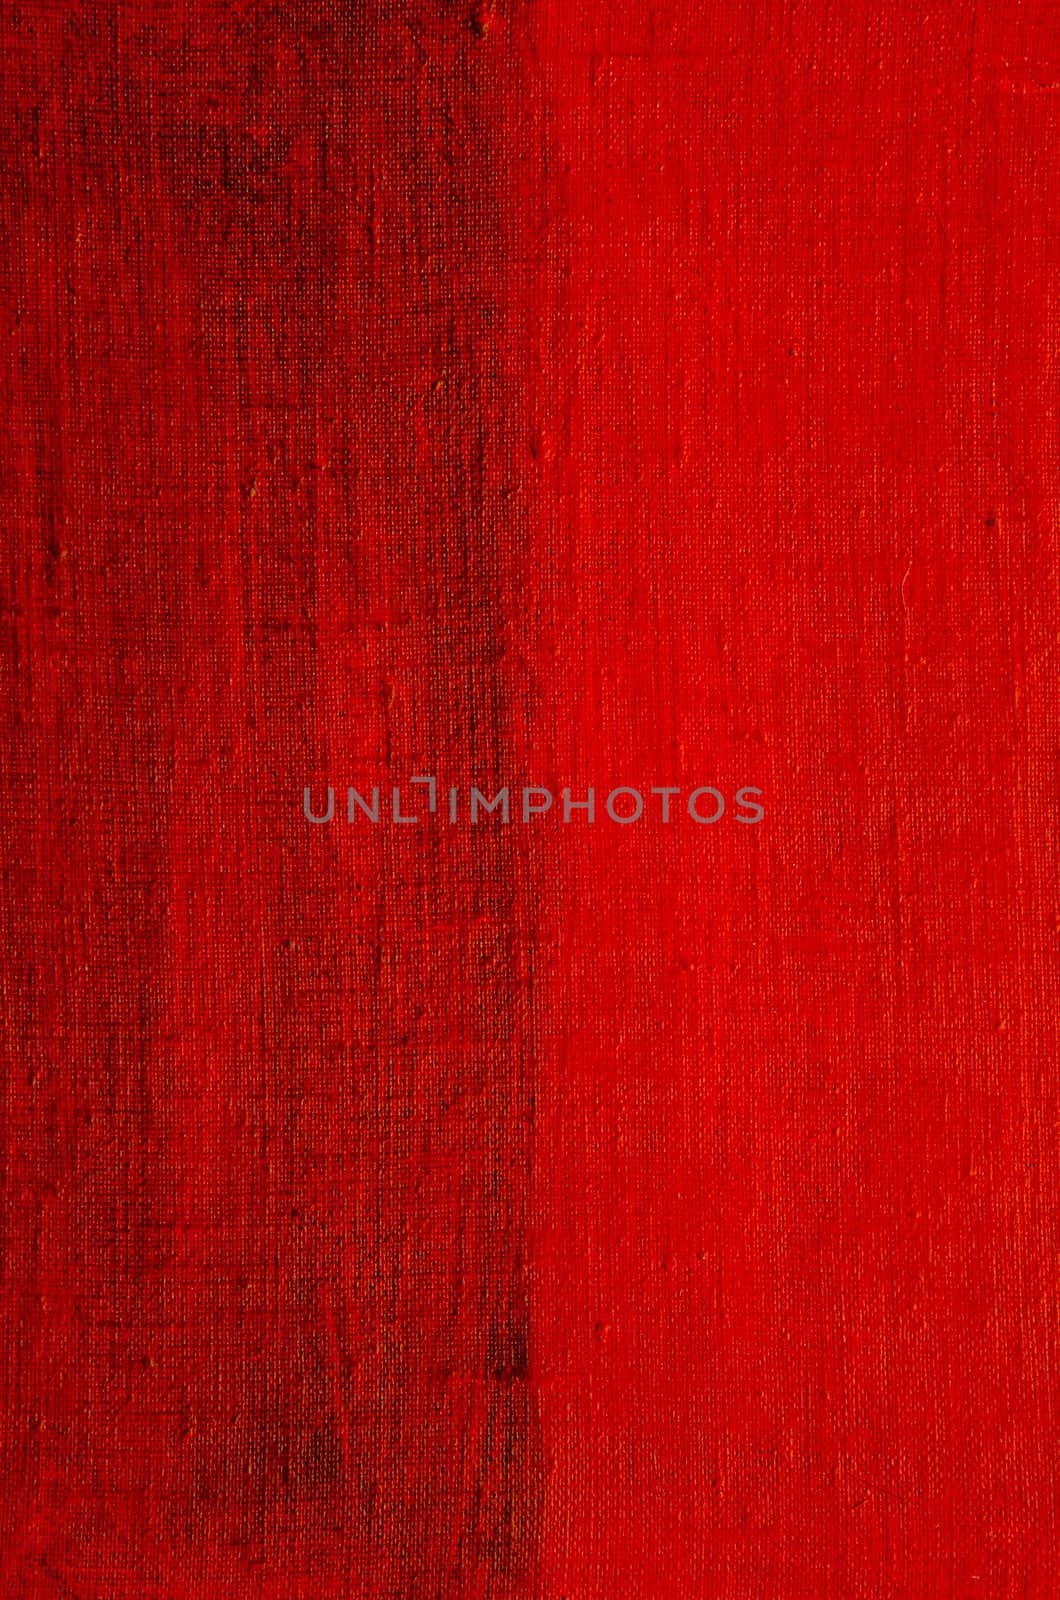 Material painted in red color. Painted background backdrop.